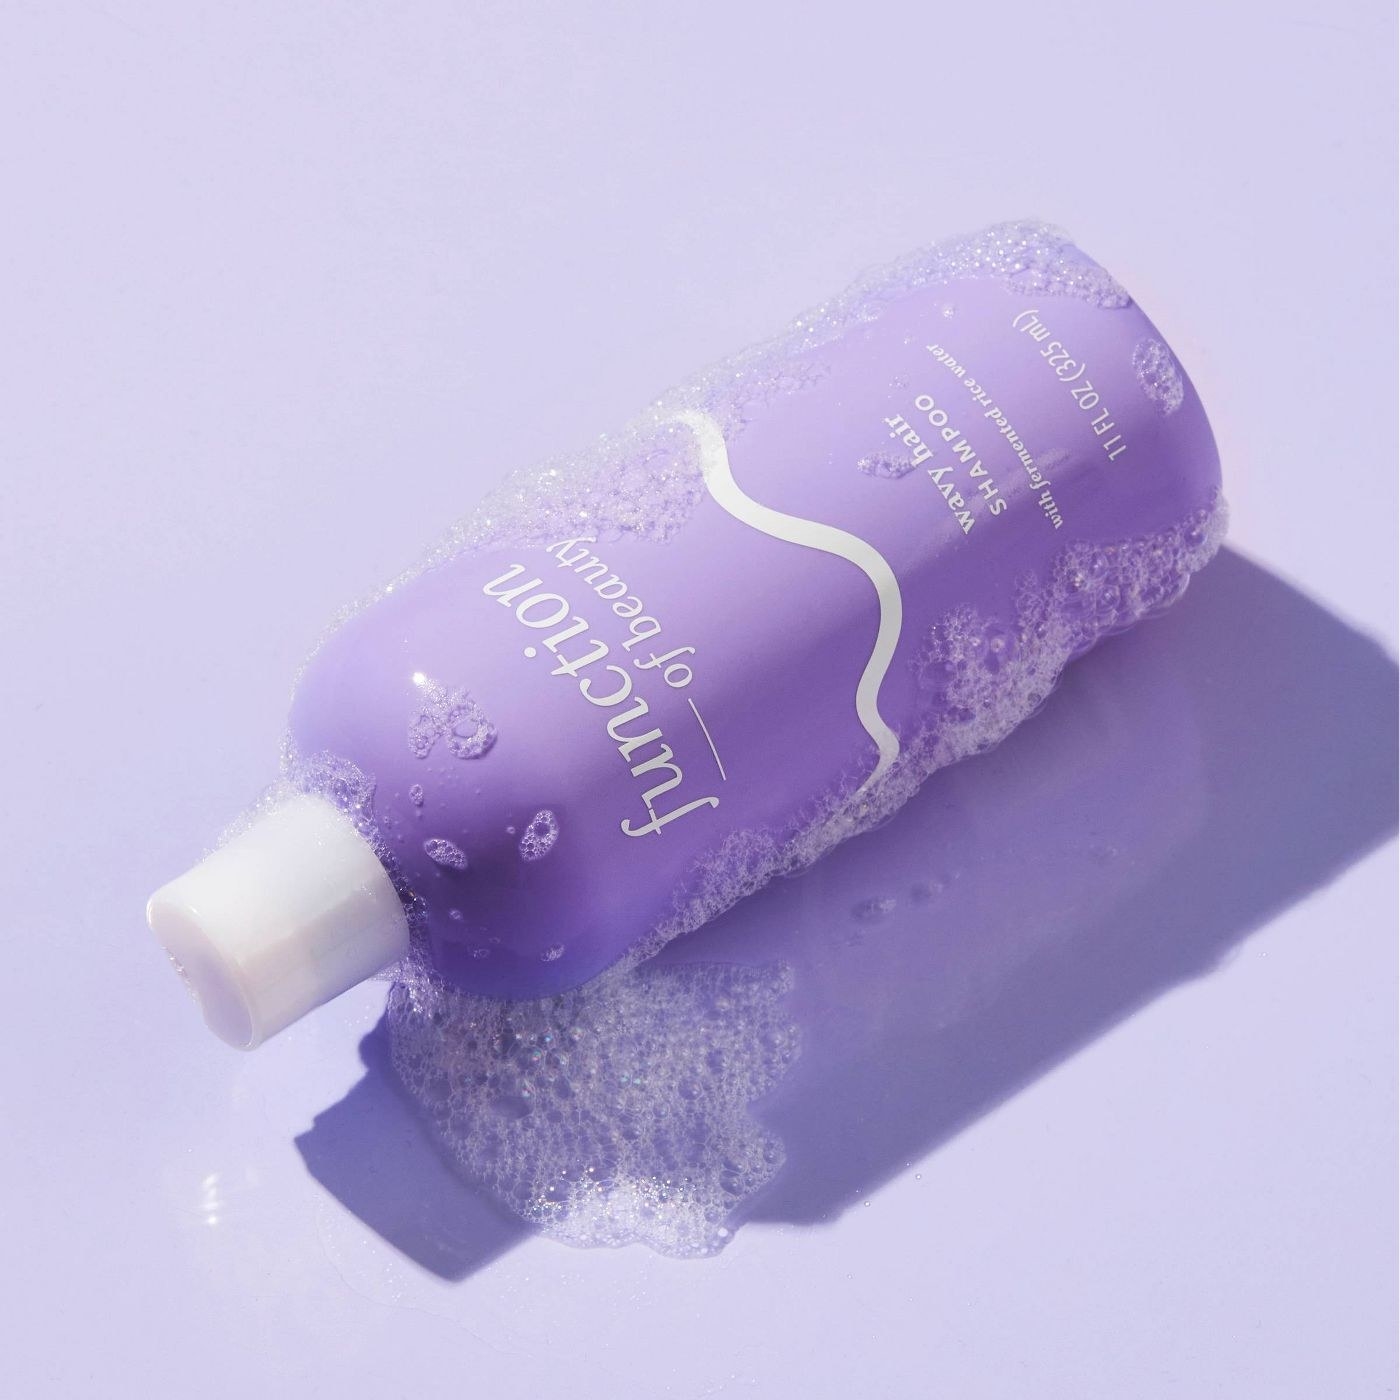 A purple bottle of hair conditioner on a purple backdrop with soap suds